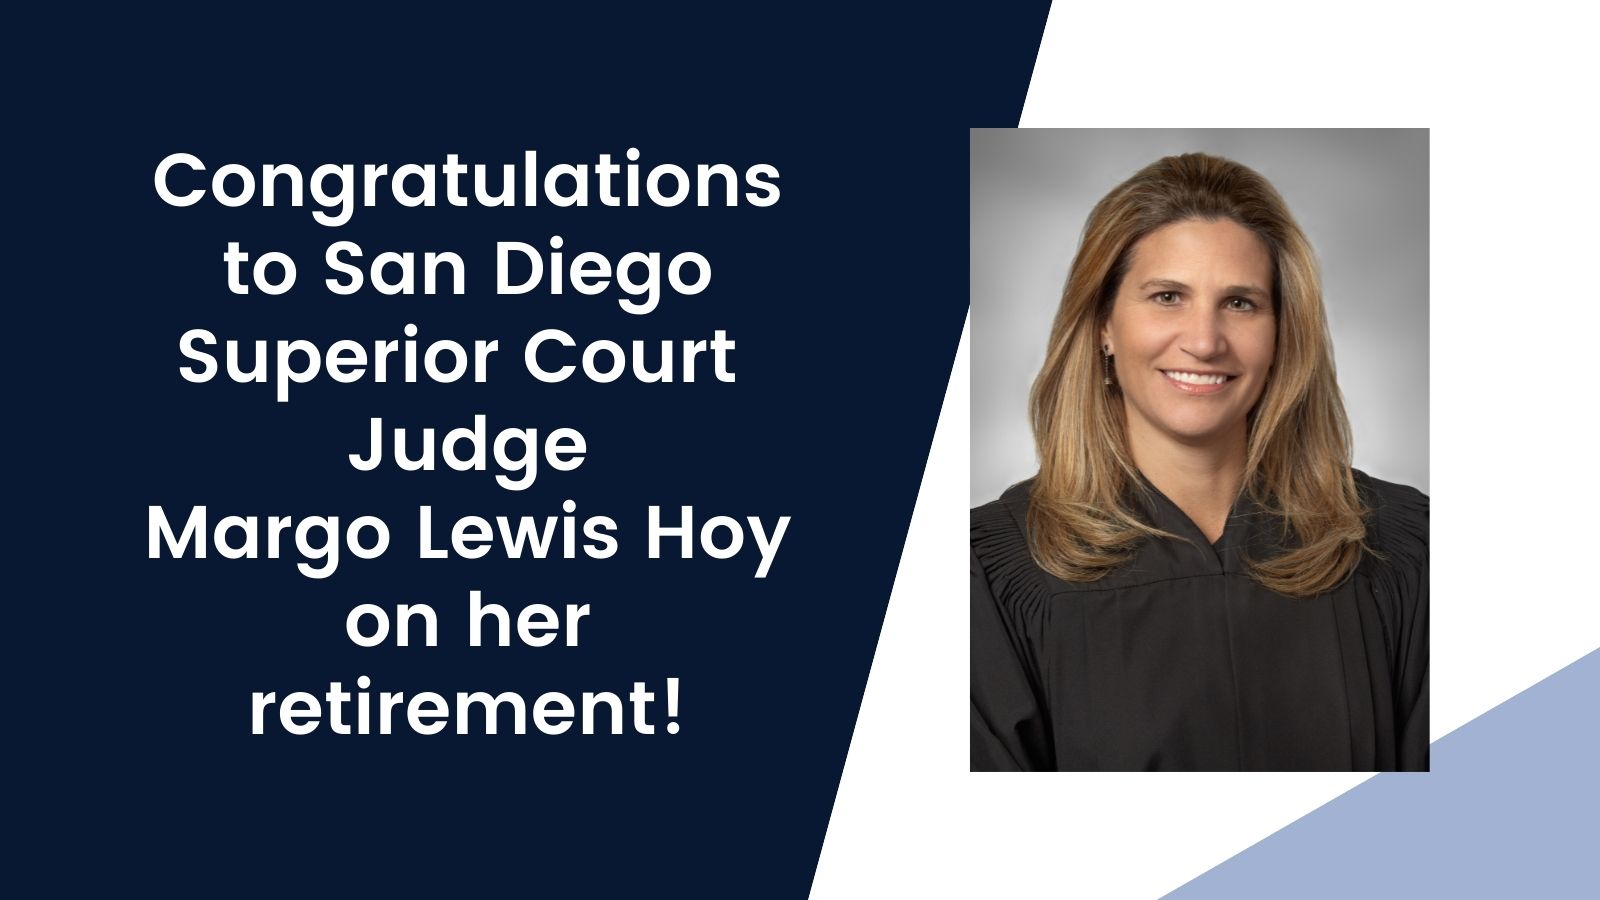 Congratulations to Judge Margo Lewis Hoy on her retirement